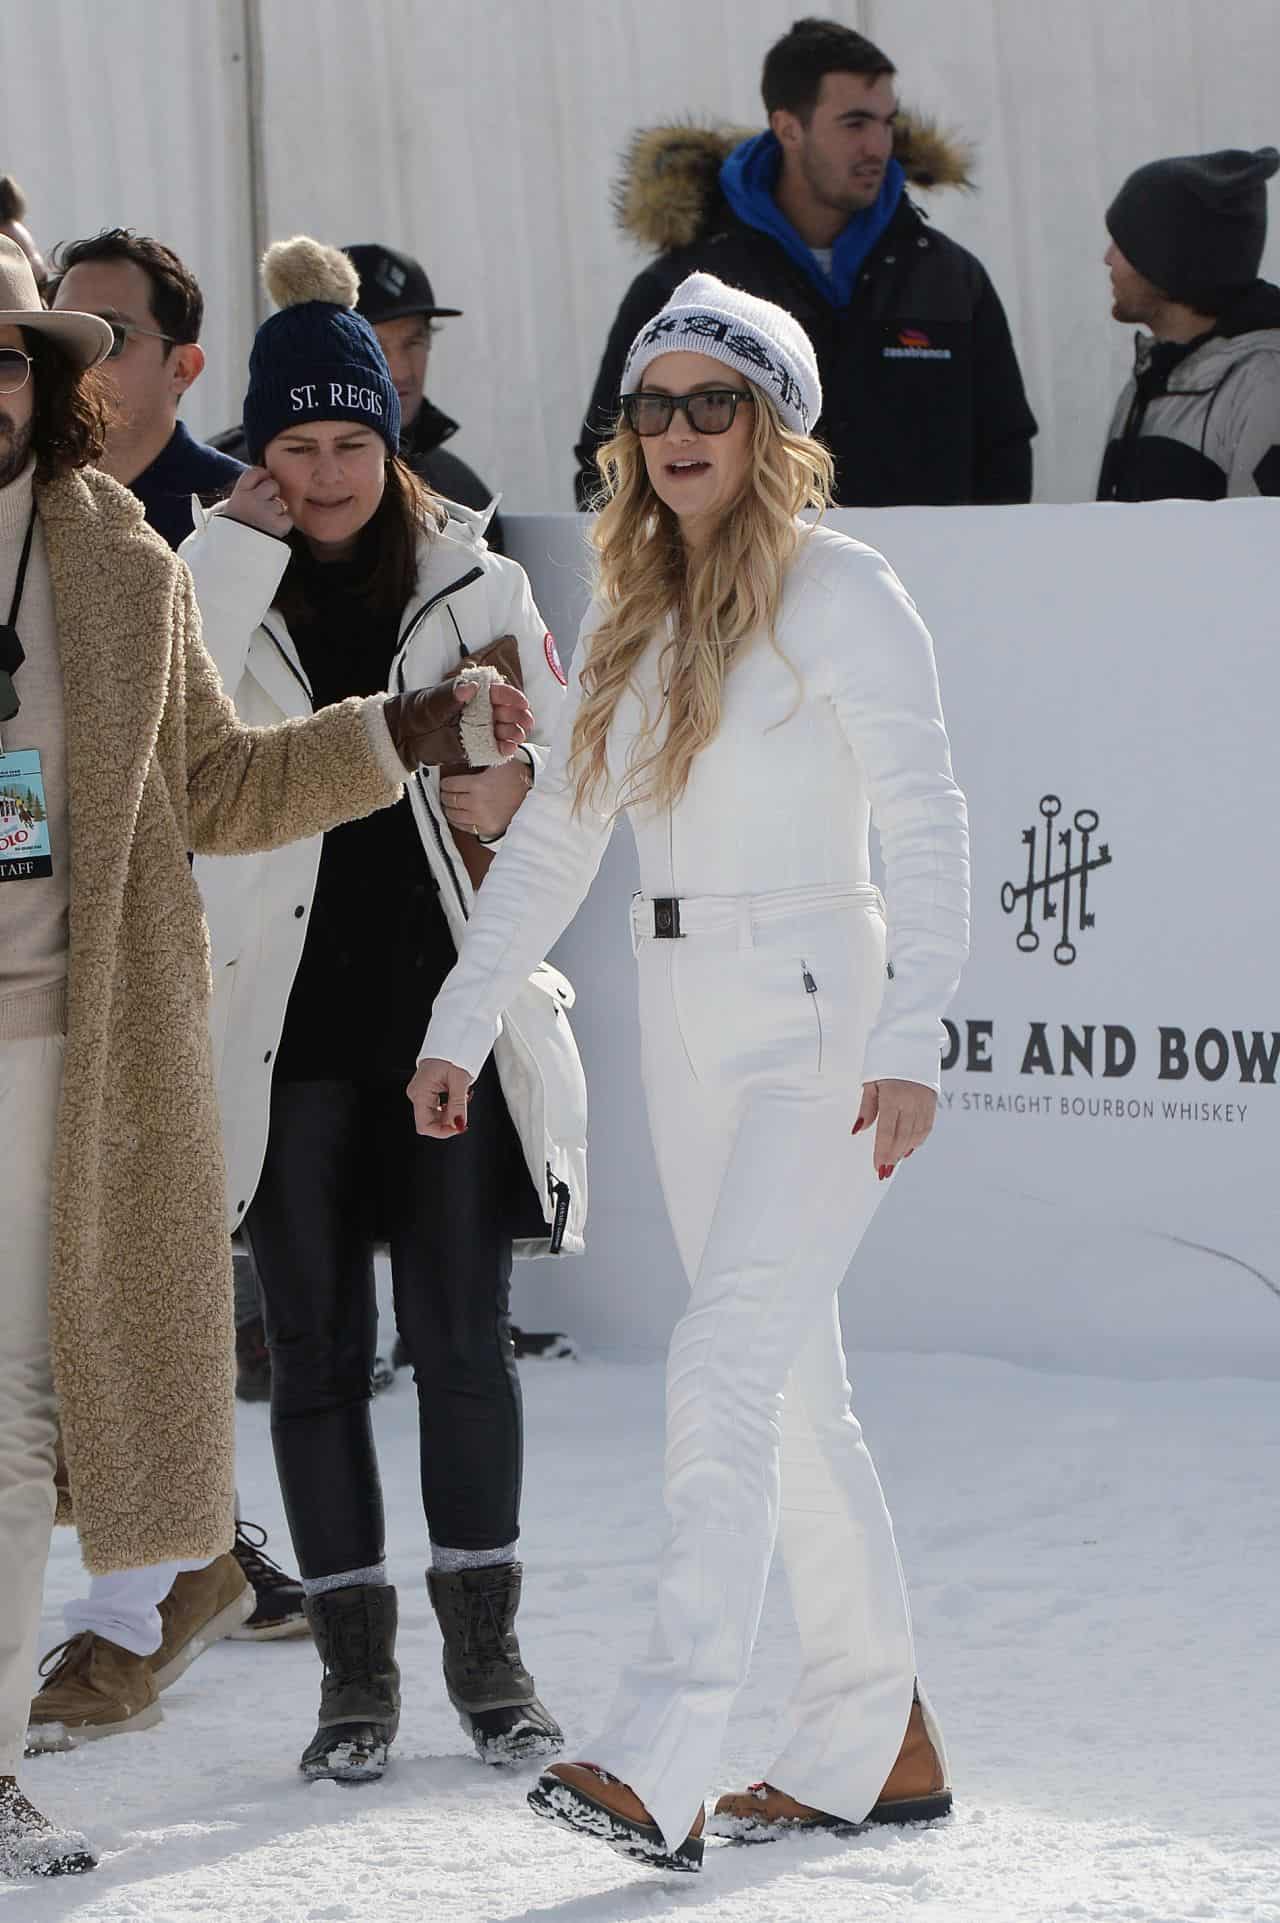 Kate Hudson Looks Stunning in a White Jumpsuit and Beanie in Aspen